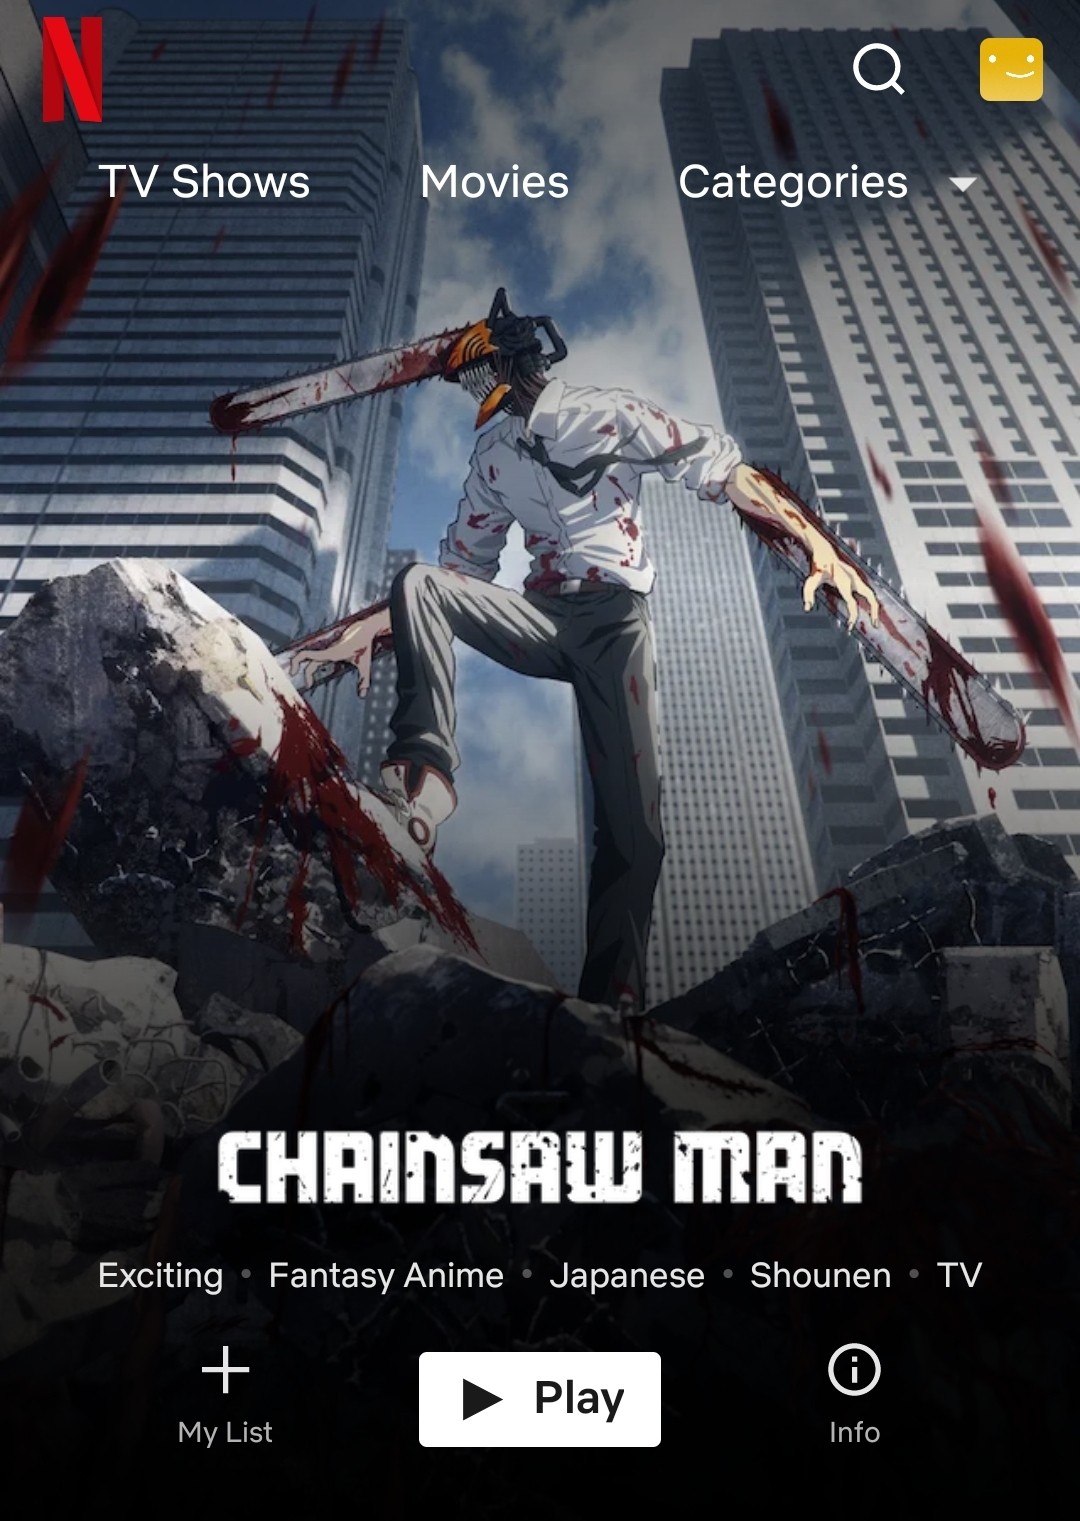 Chainsaw Man is now available on Netflix in select countries